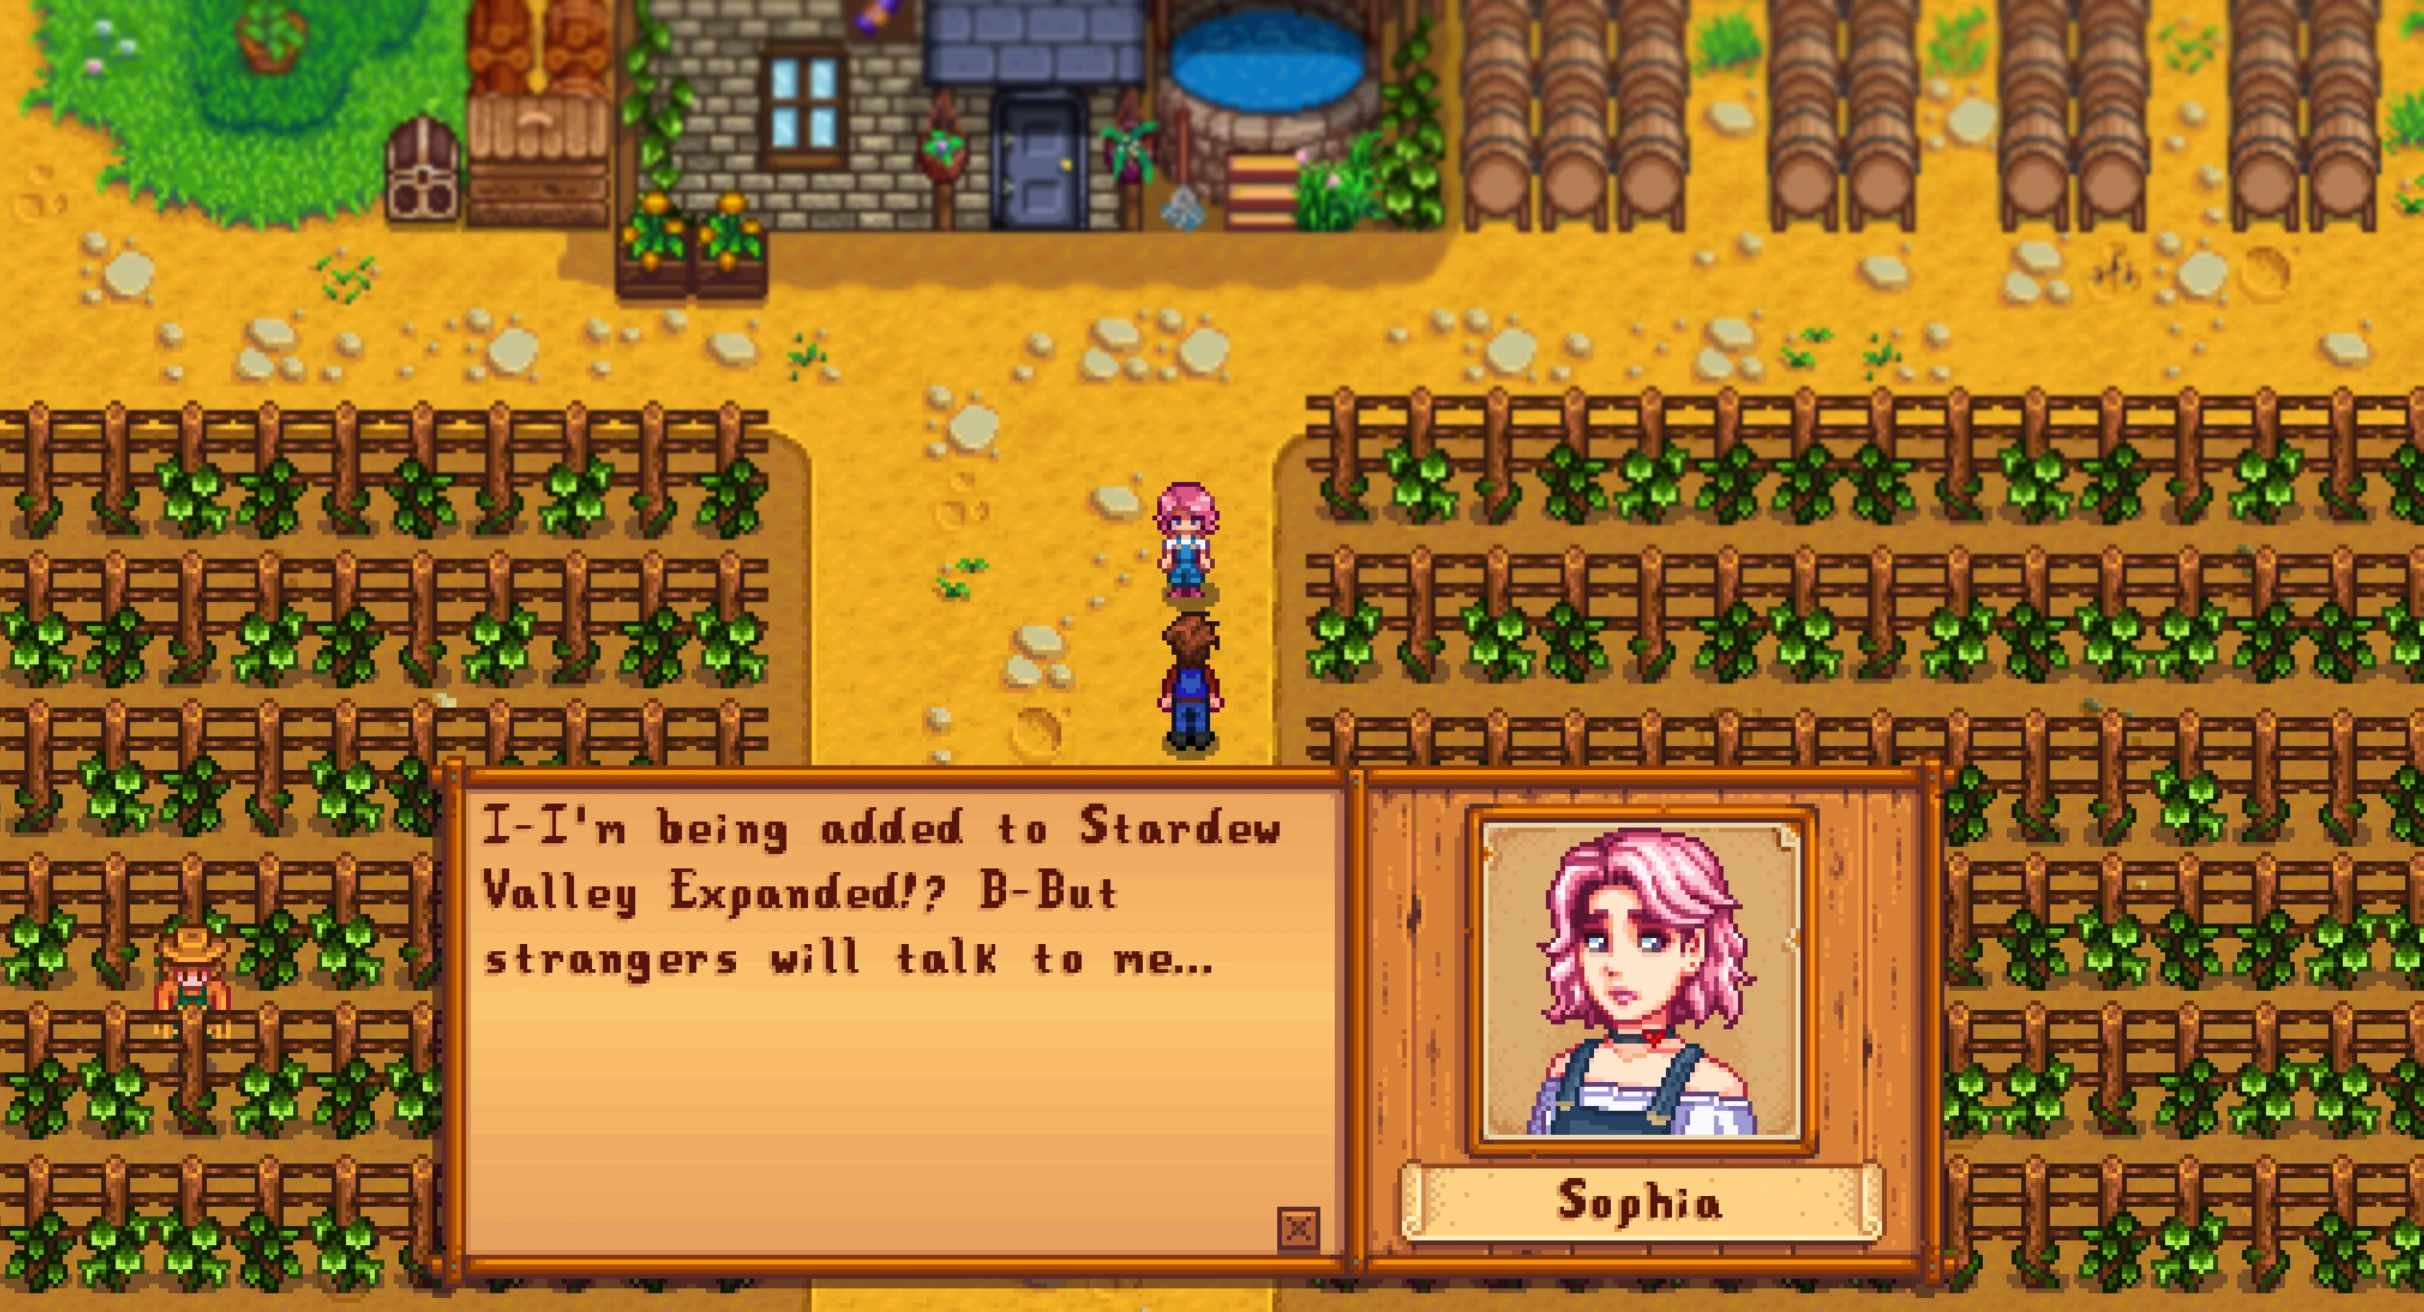 First look at Sophia coming this Christmas for Stardew Valley Expanded.